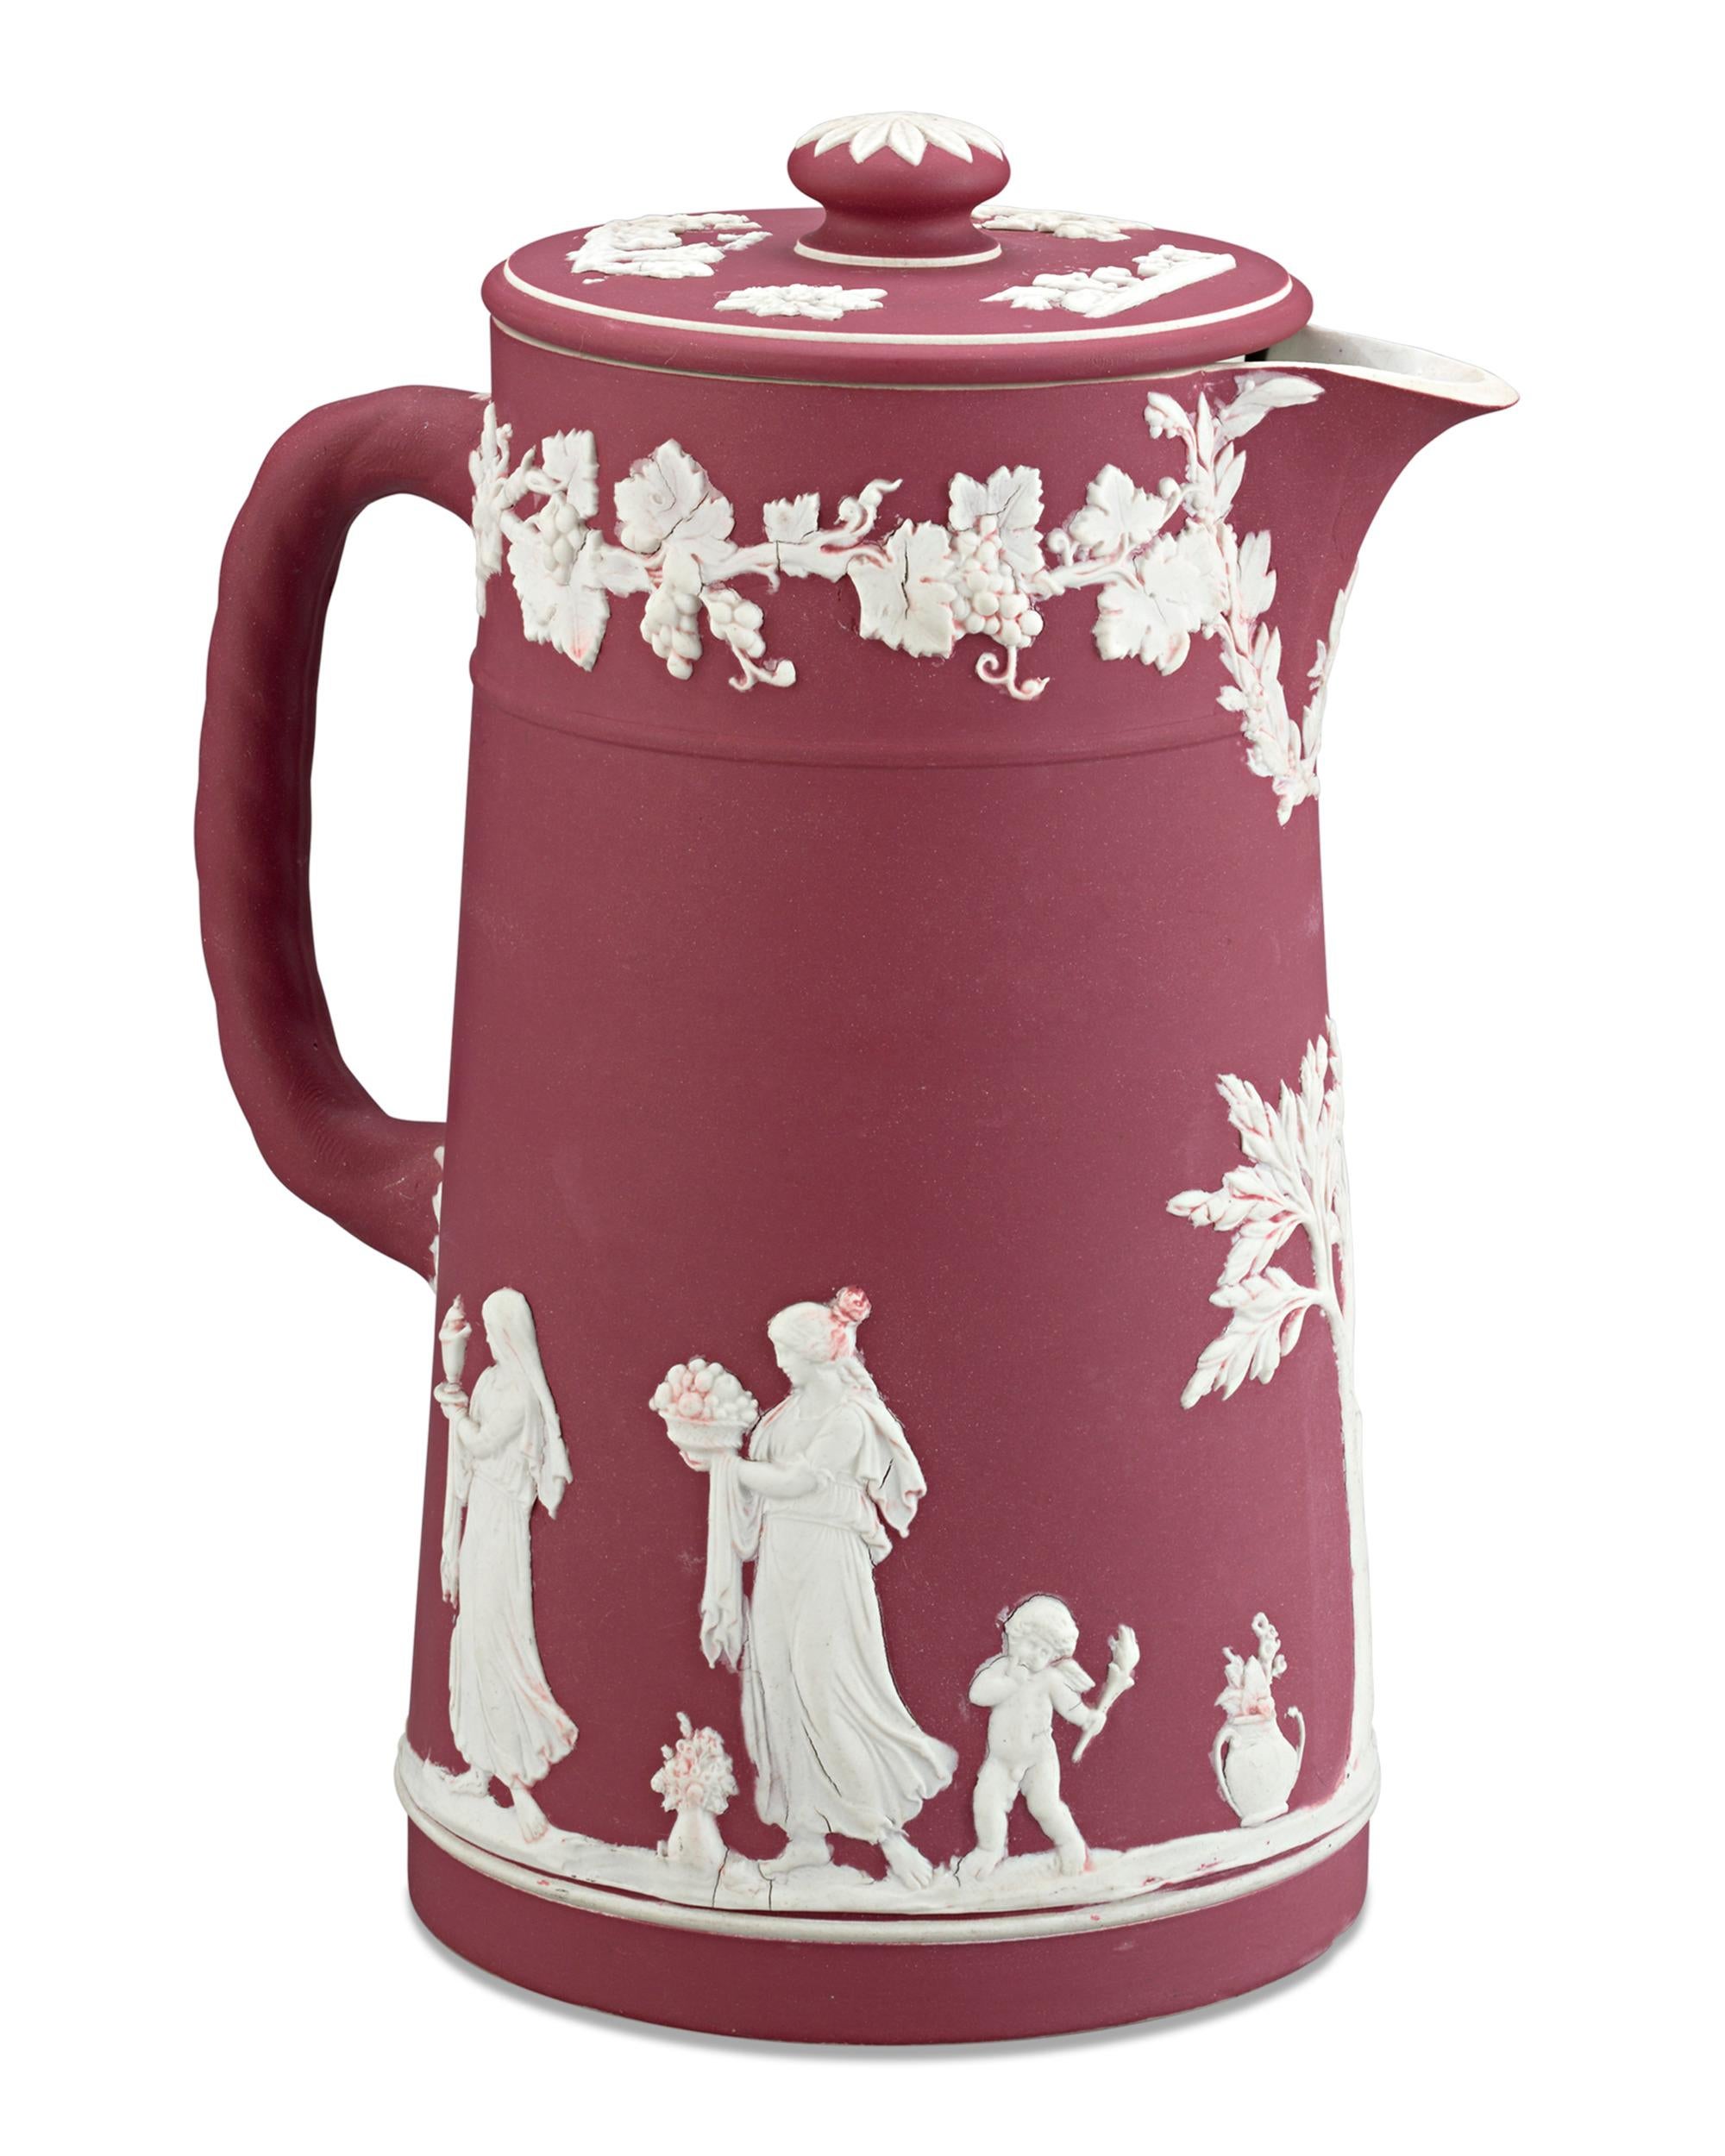 This striking Wedgwood crimson dip bas-relief covered jug features an applied white jasper neoclassical decoration of grapevines bordering the rim. Delicately rendered maidens, children and foliage encircle the pitcher’s body, providing wonderful